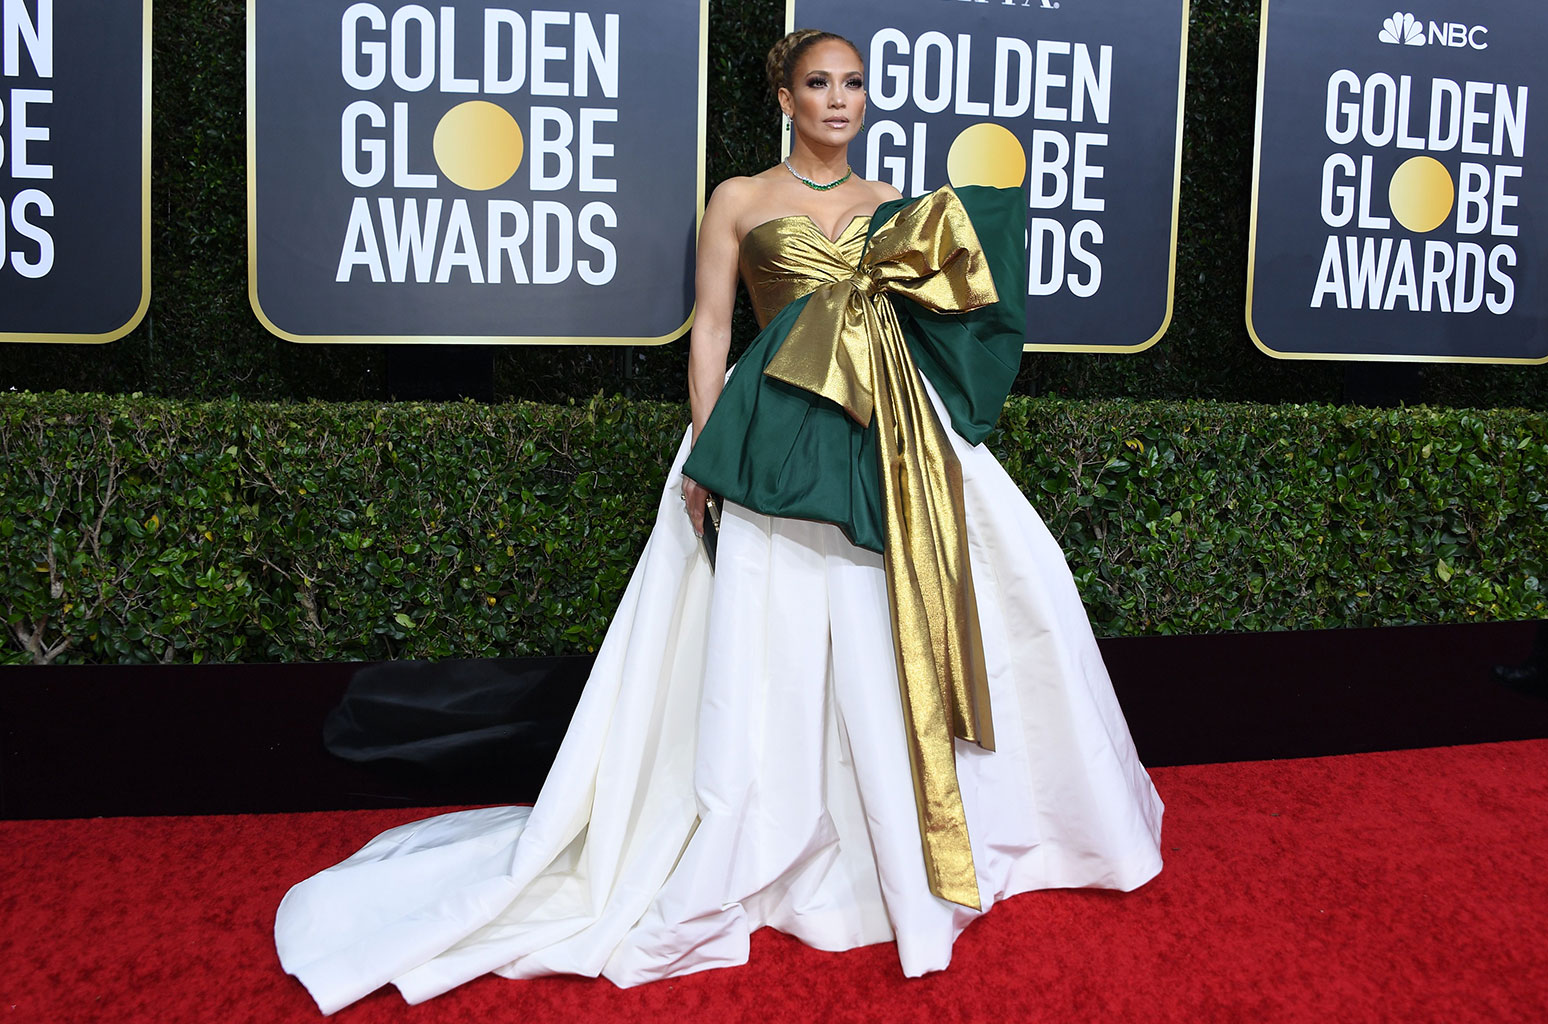 Jennifer Lopez Tops Off Her Dramatic Dress With a Bow on the 2020 Golden Globes Red Carpet - www.billboard.com